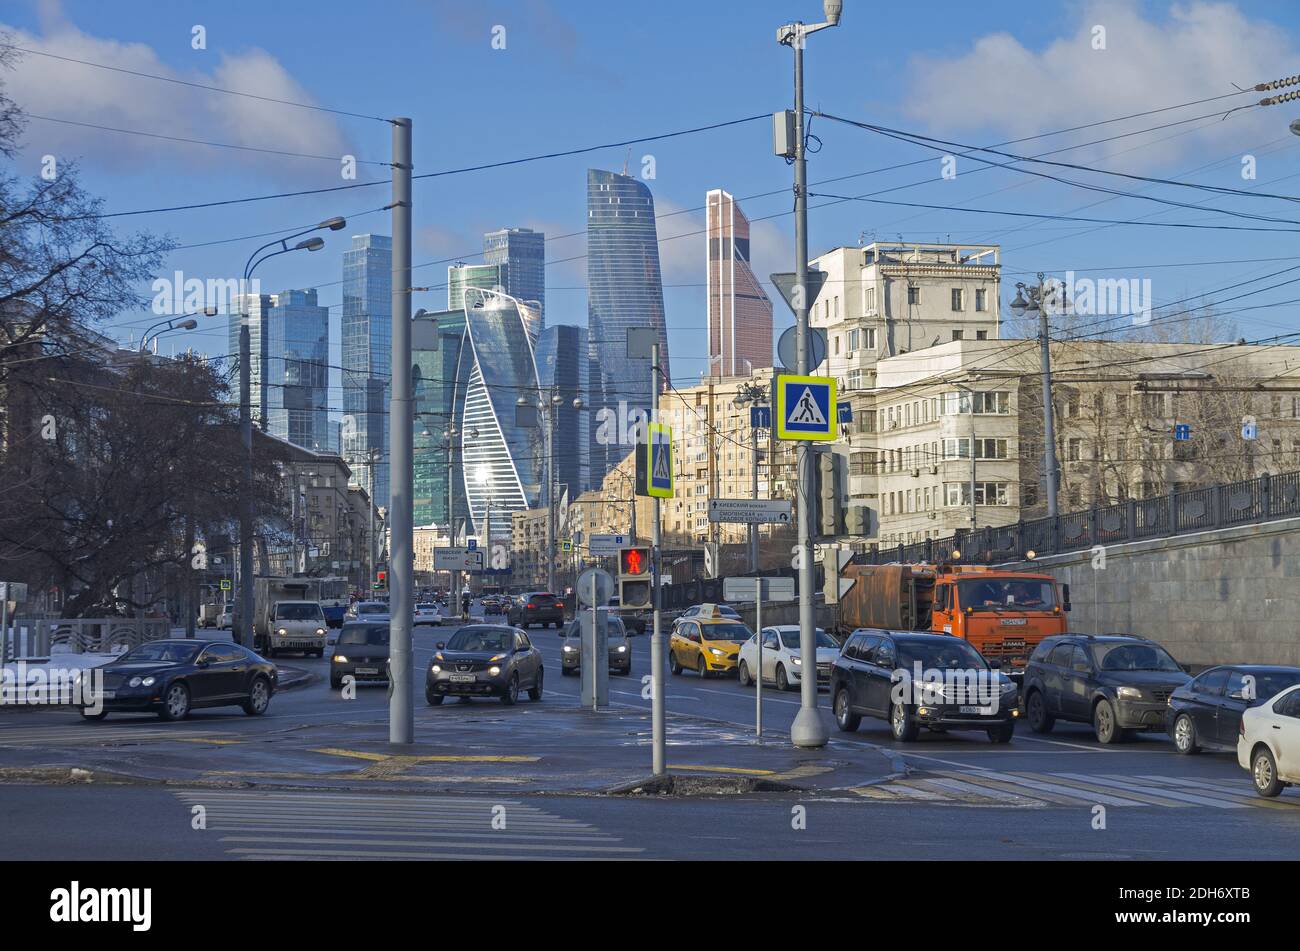 Combination of different architectural styles in Moscow Stock Photo